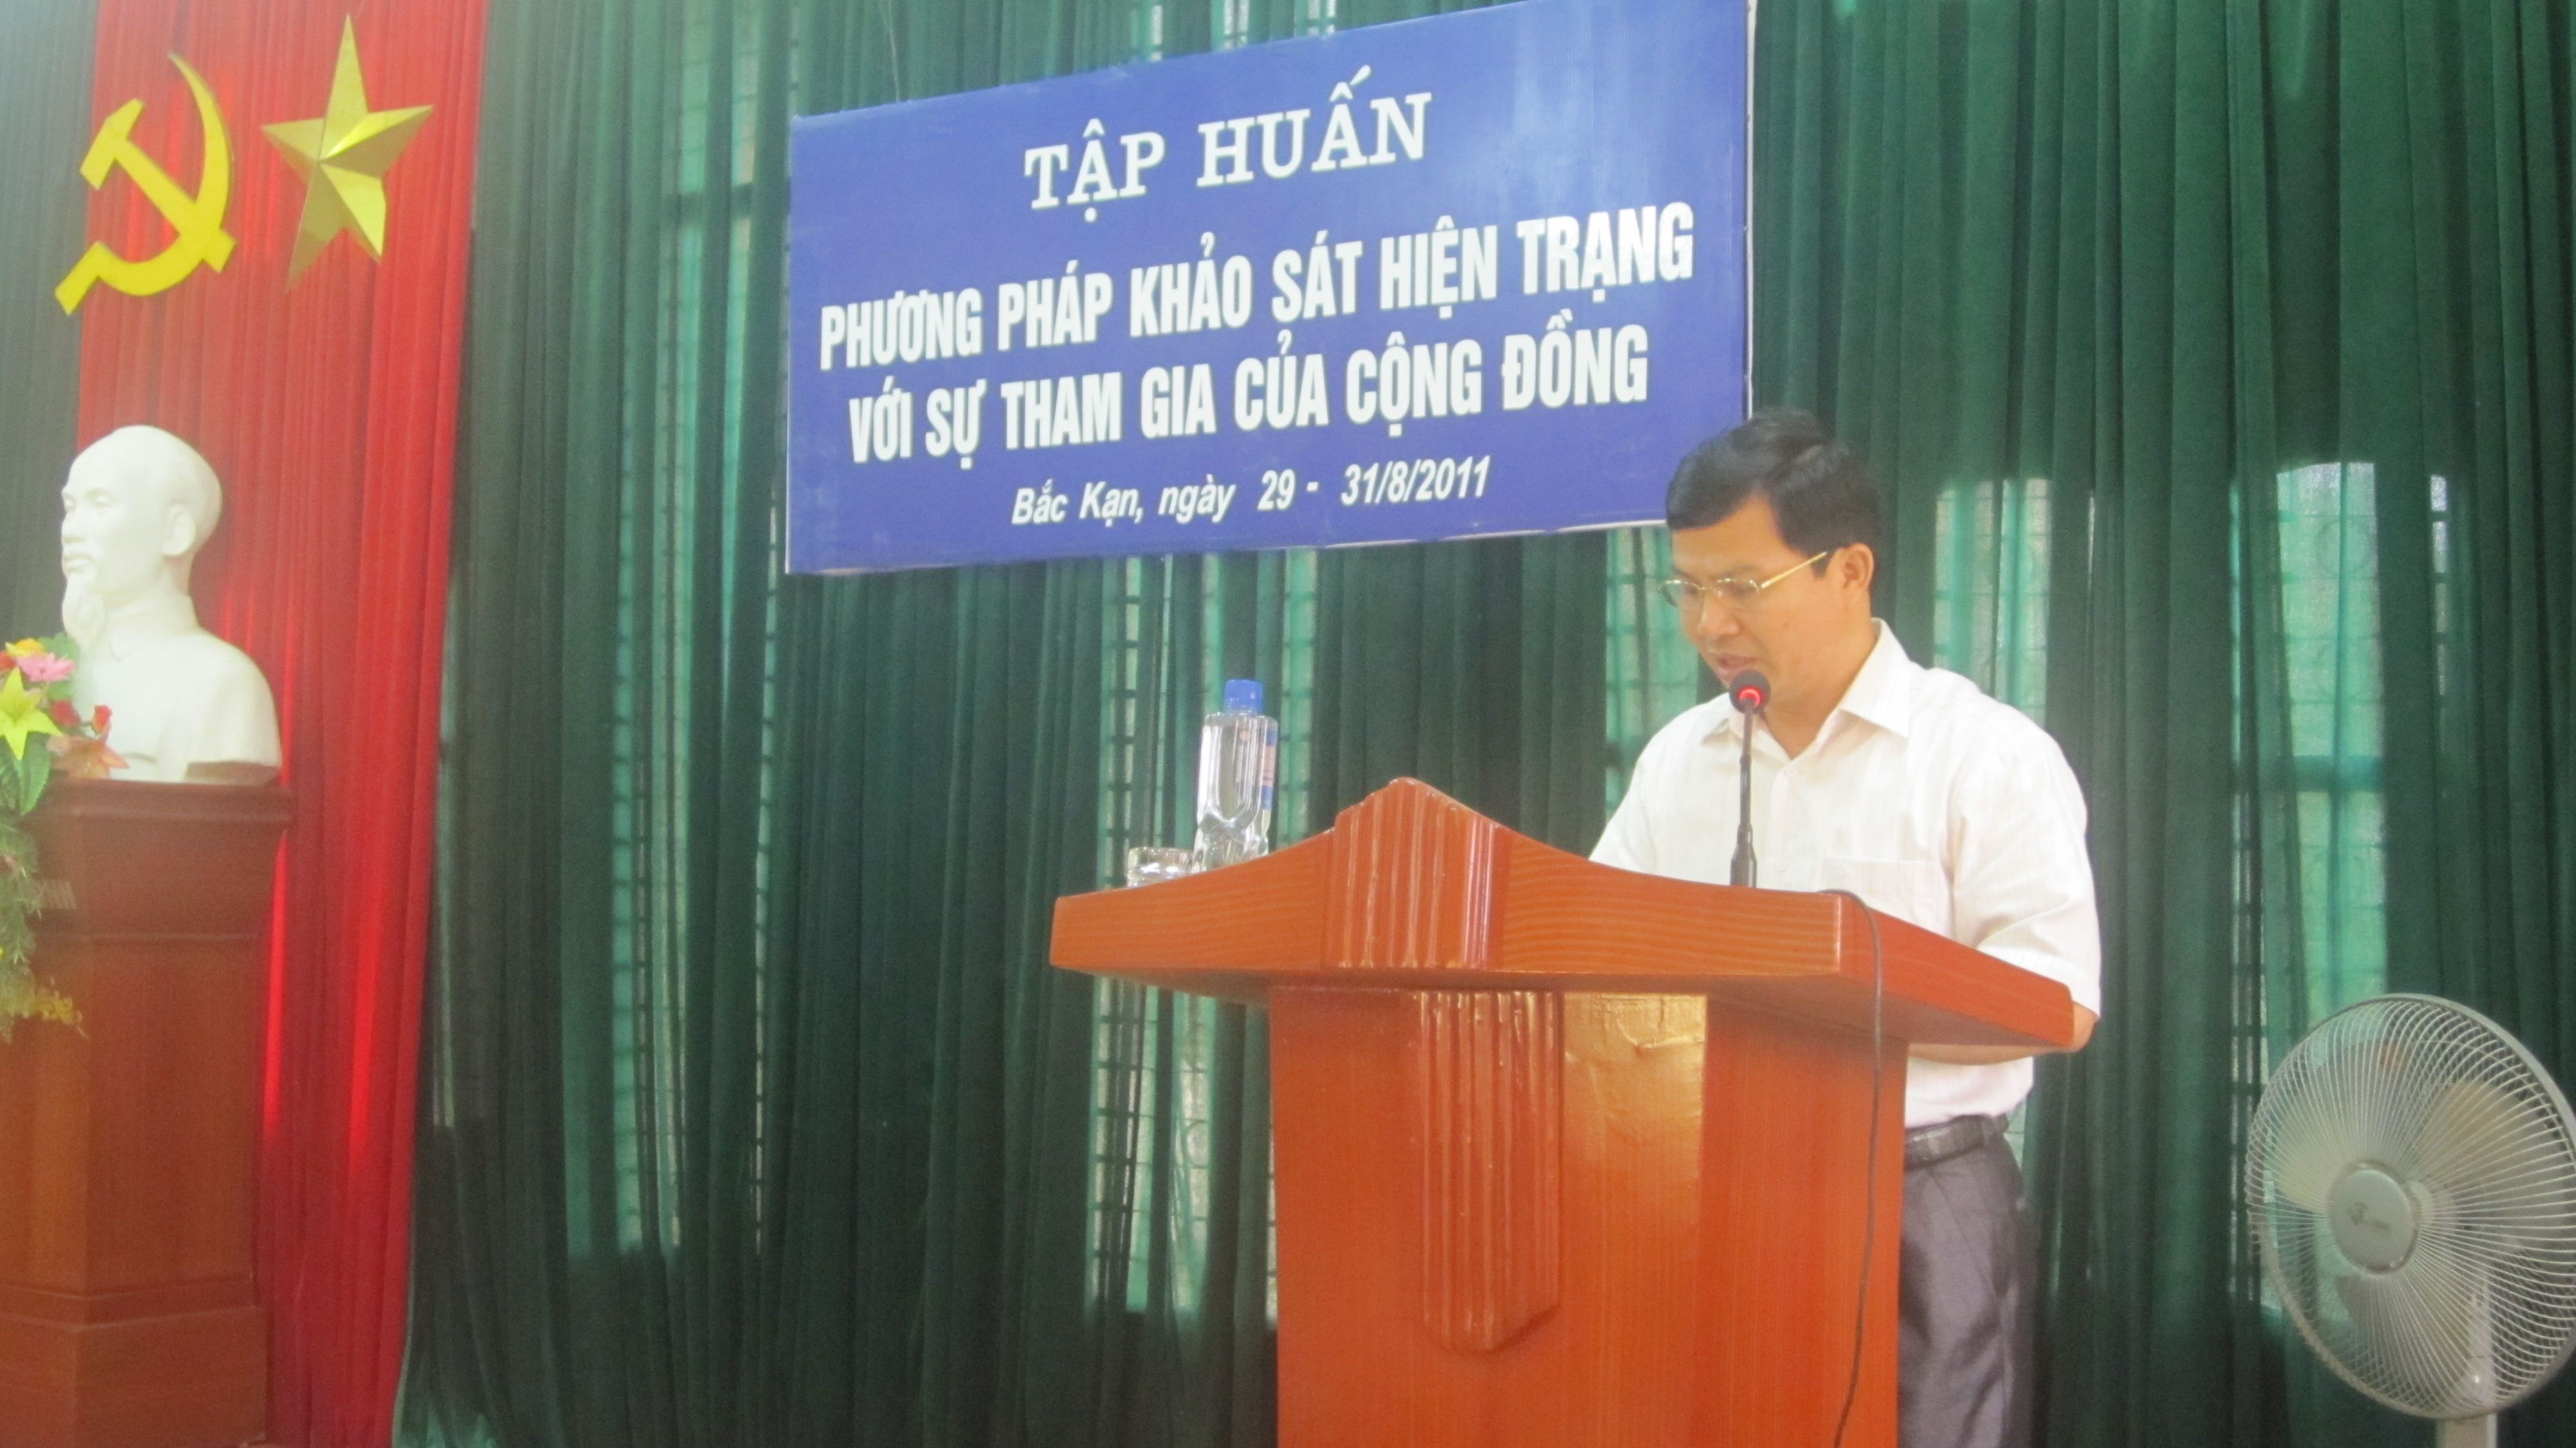 mr. leng van chien chairman of ban kan town peoples committee speaks at the training